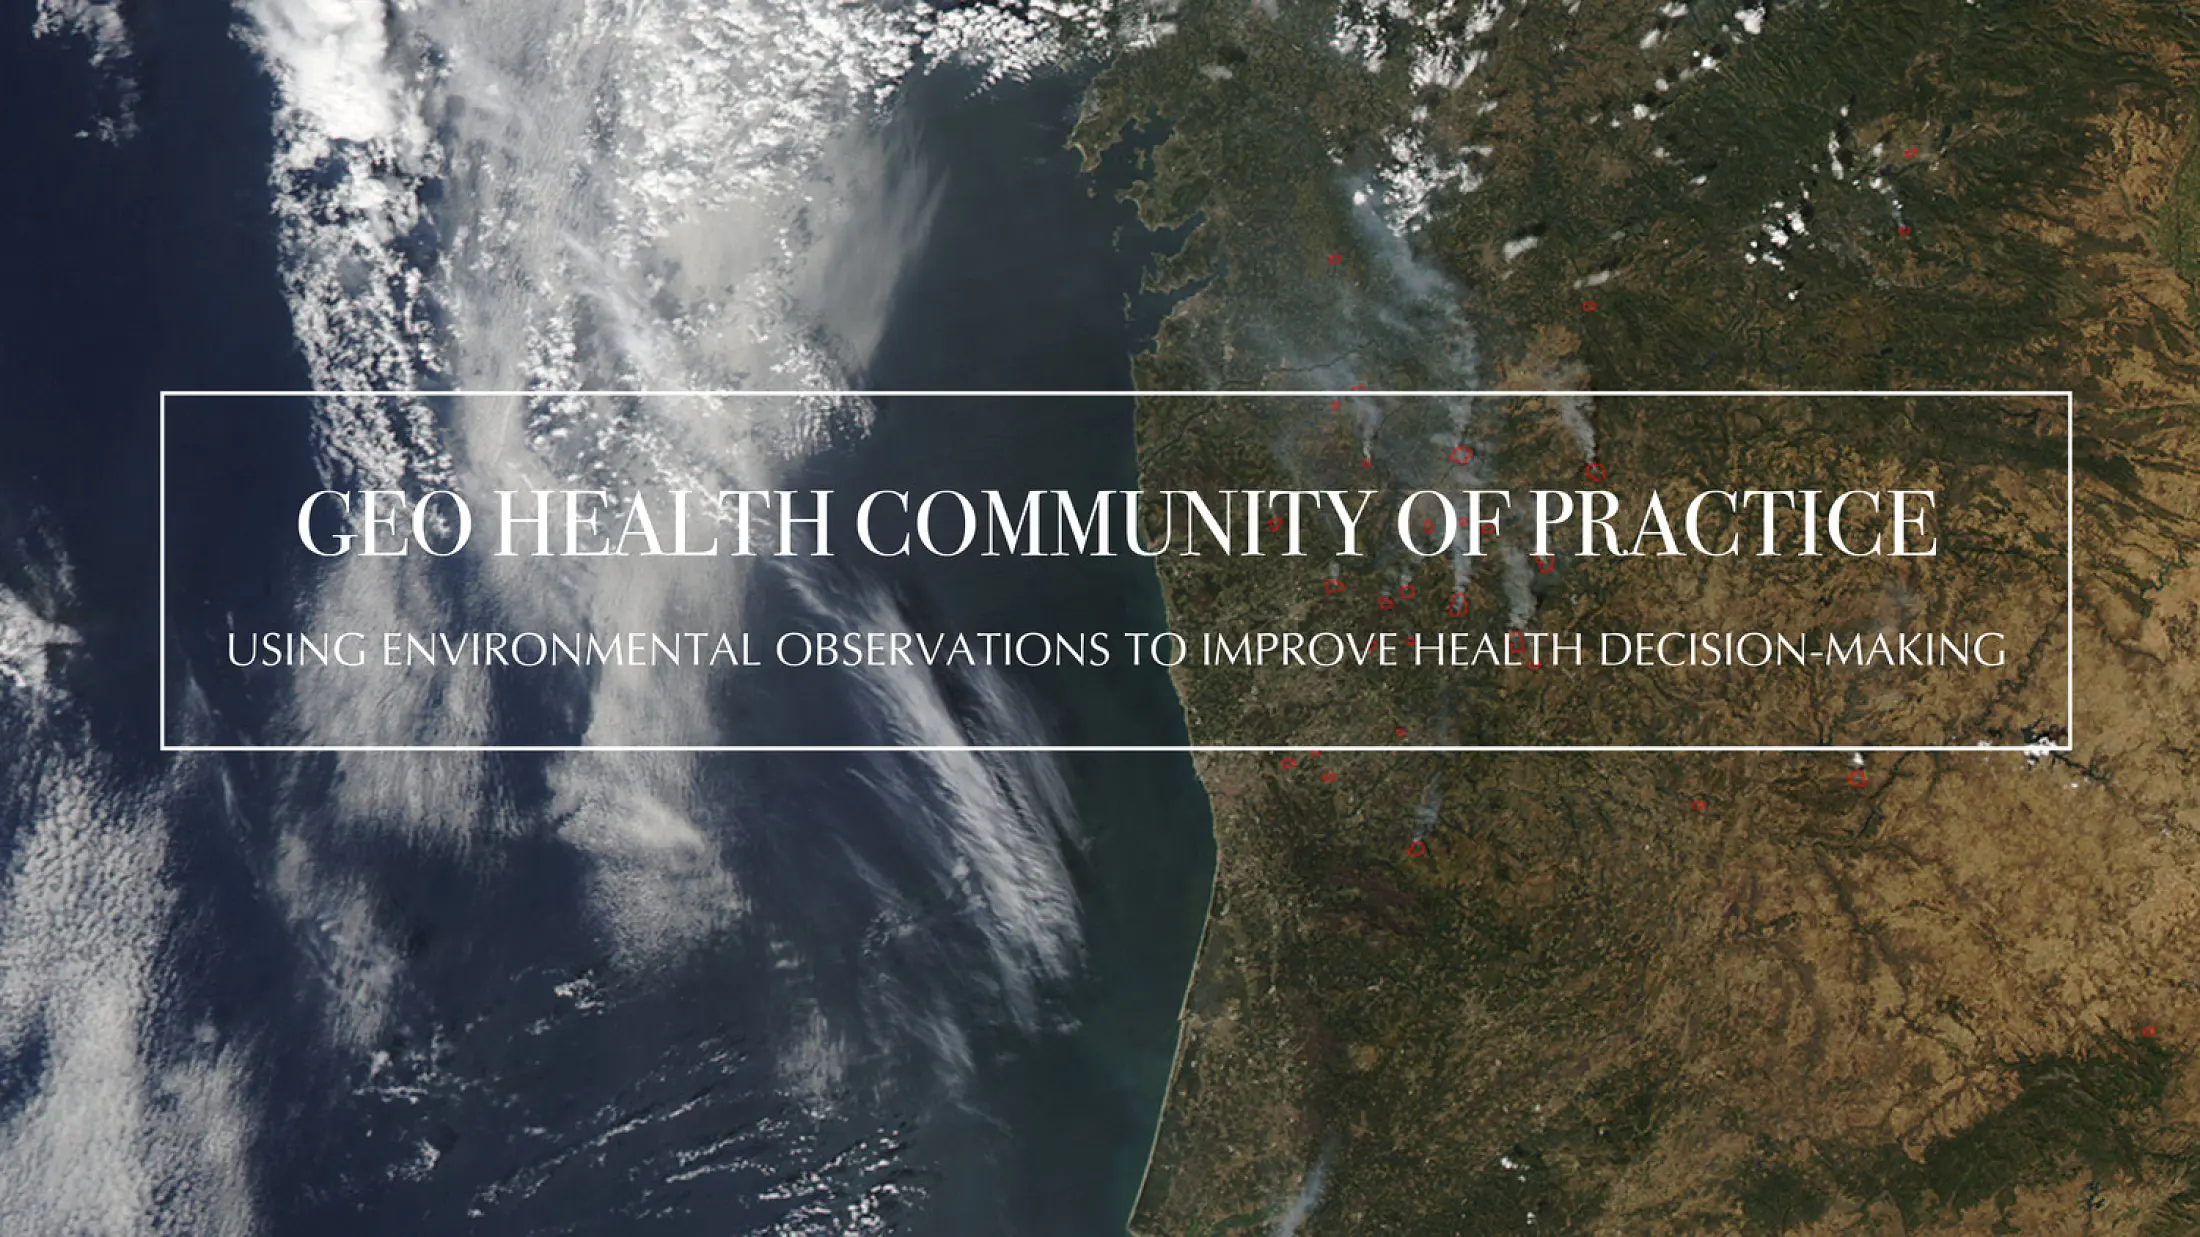 Health Community of Practice supports student engagement